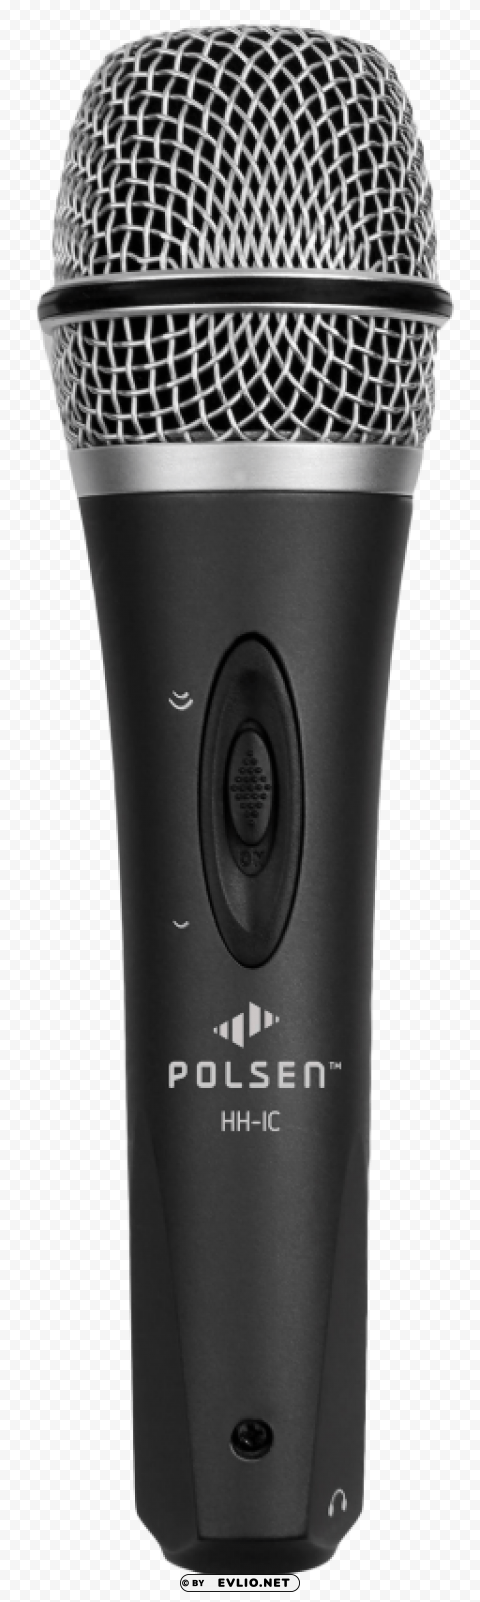 Microphone PNG transparent photos library